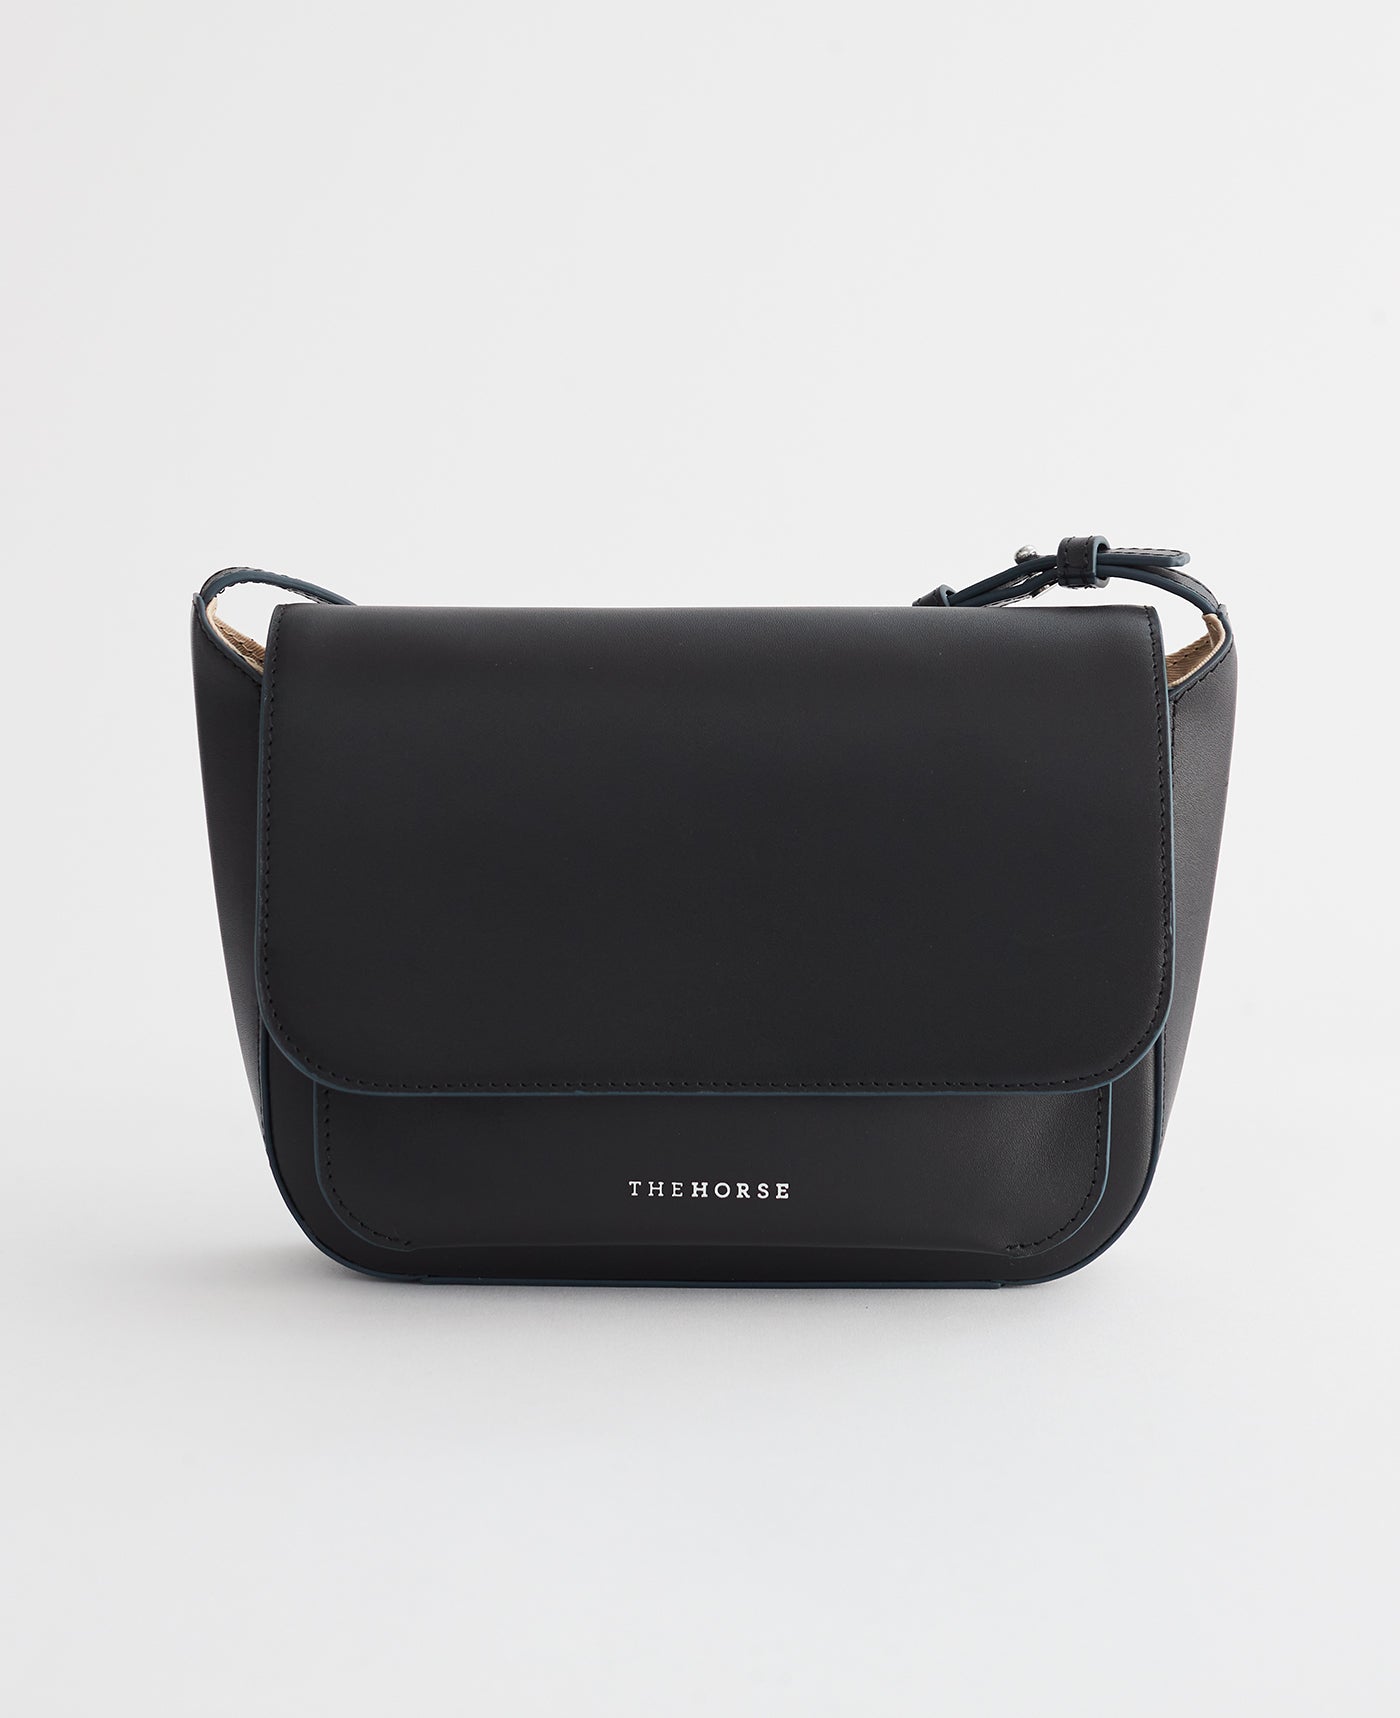 The Medium Remmy Bag: Leather Shoulder Bag in Black by The Horse®